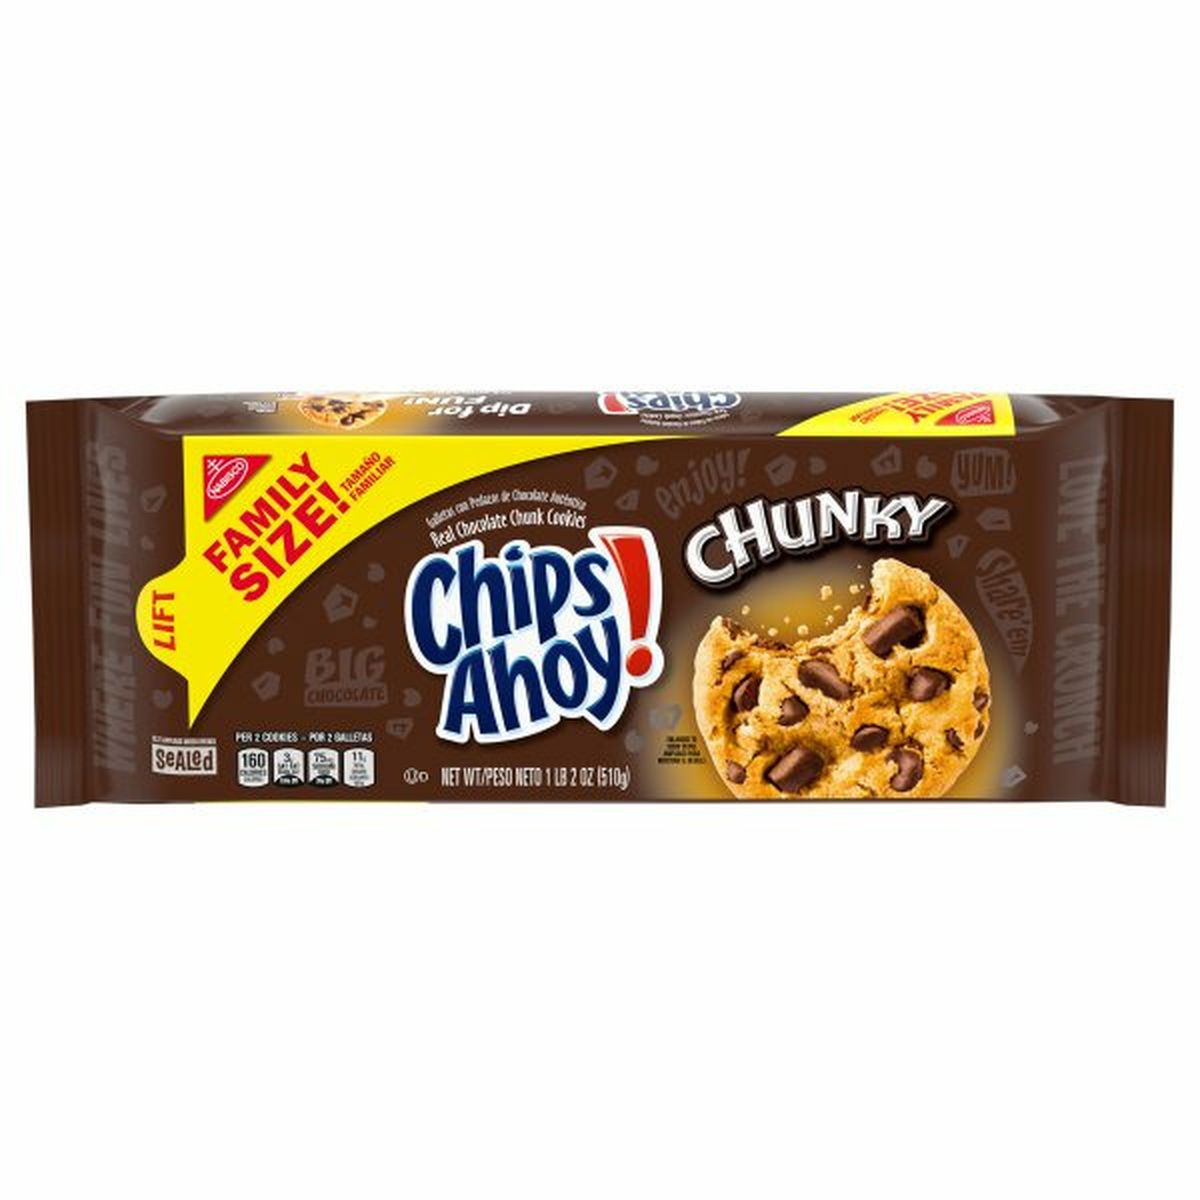 Calories in Chips Ahoy! Cookies, Chunky, Family Size